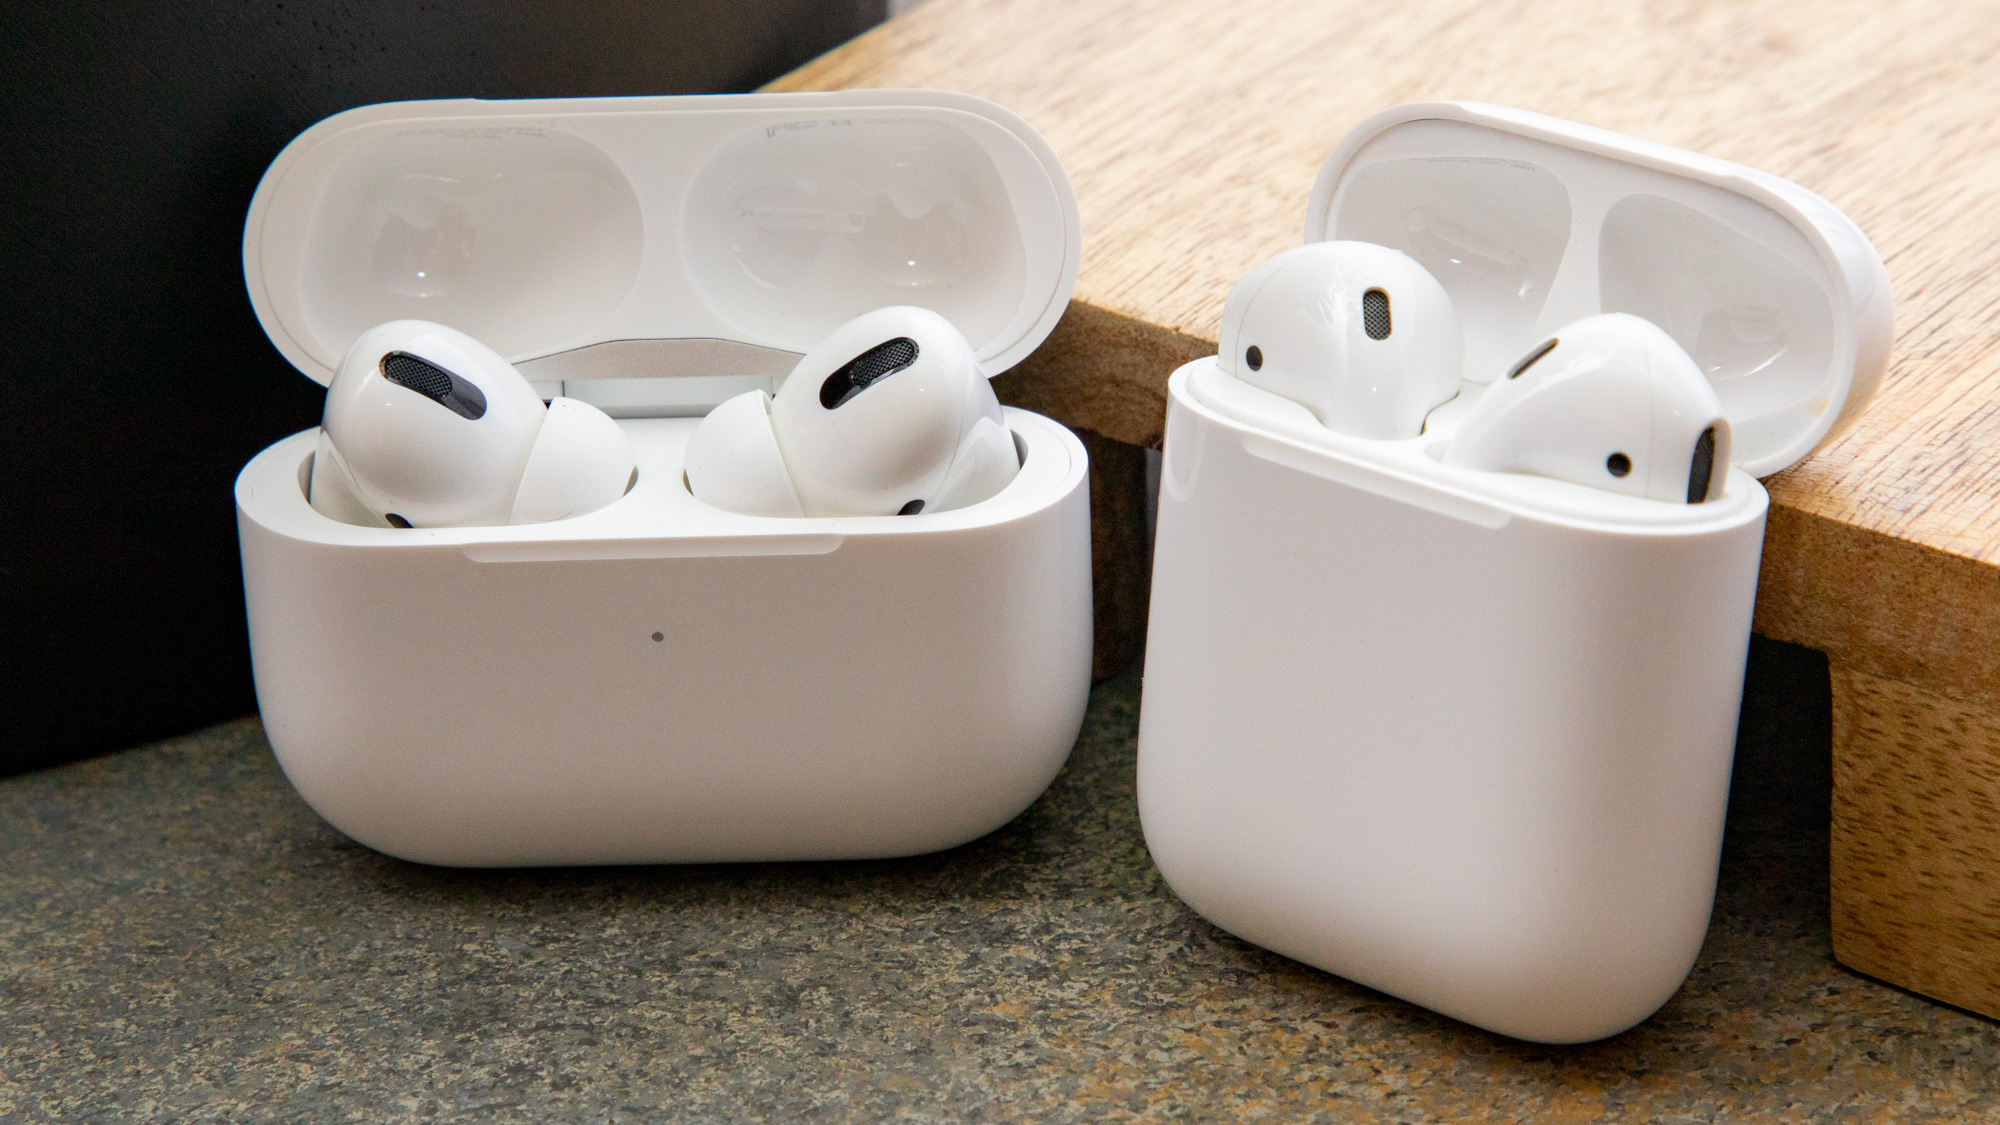 AirPods Pro next to the AirPods